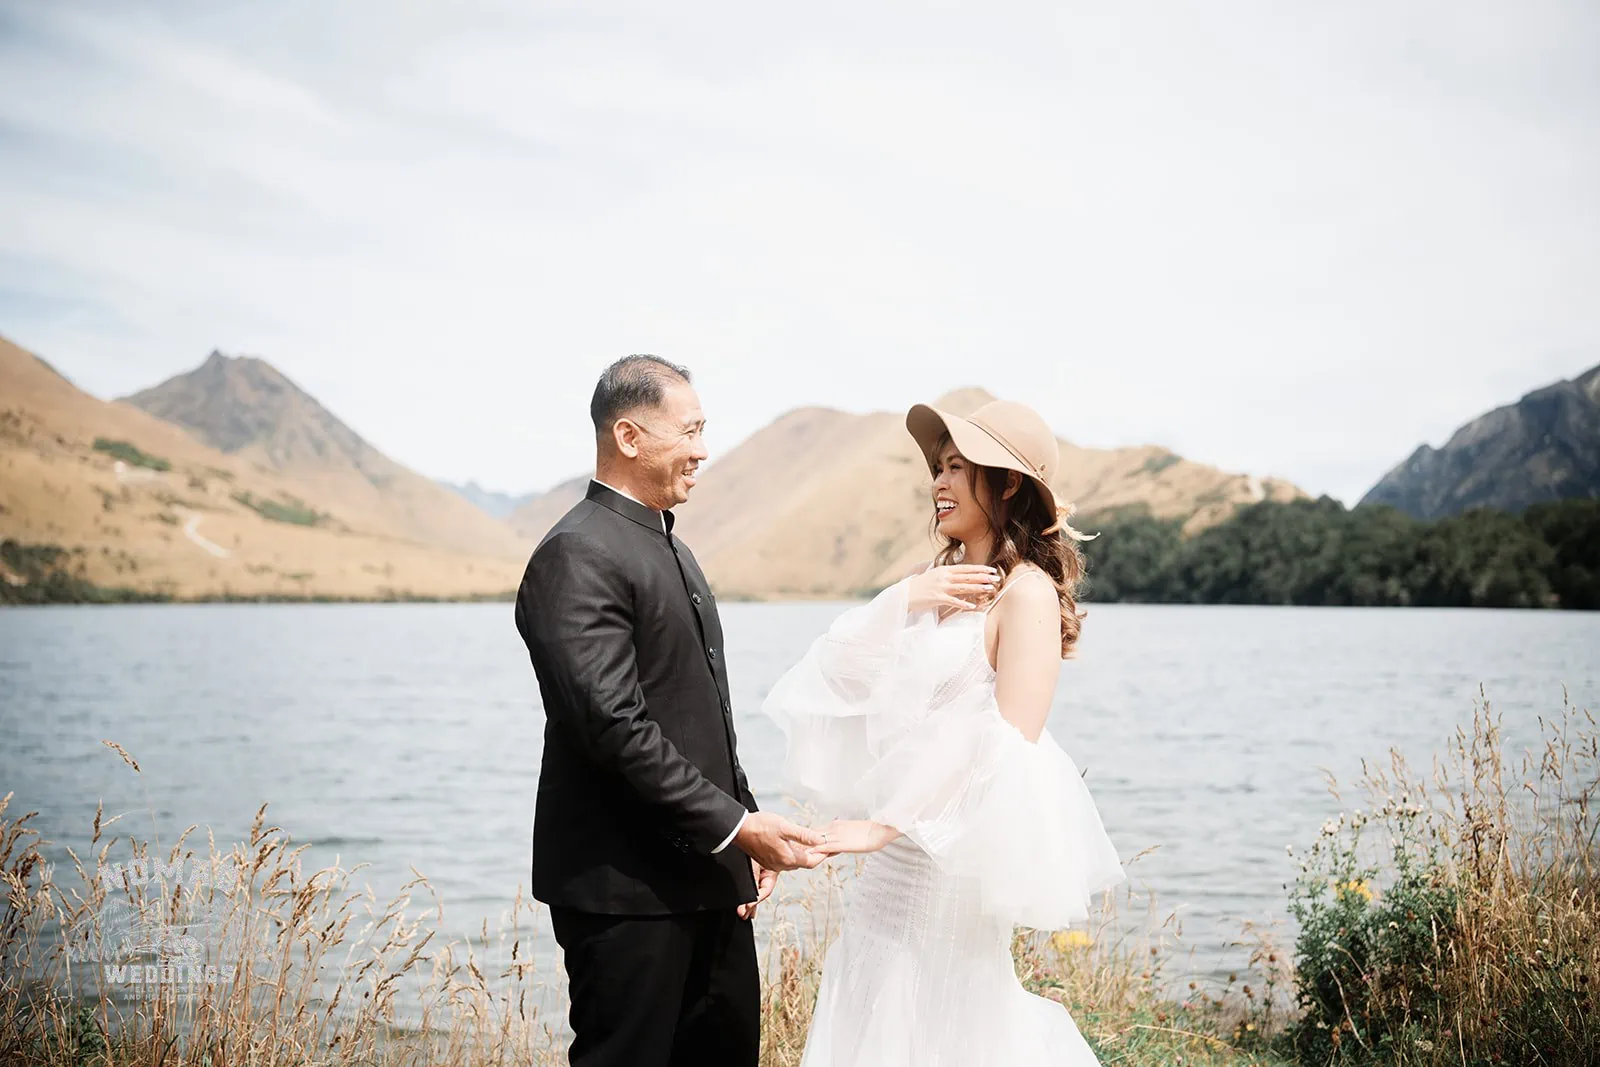 Nhi & Nicholas' Pre-Wedding Shoot in Queenstown NZ with mountains and lake views.